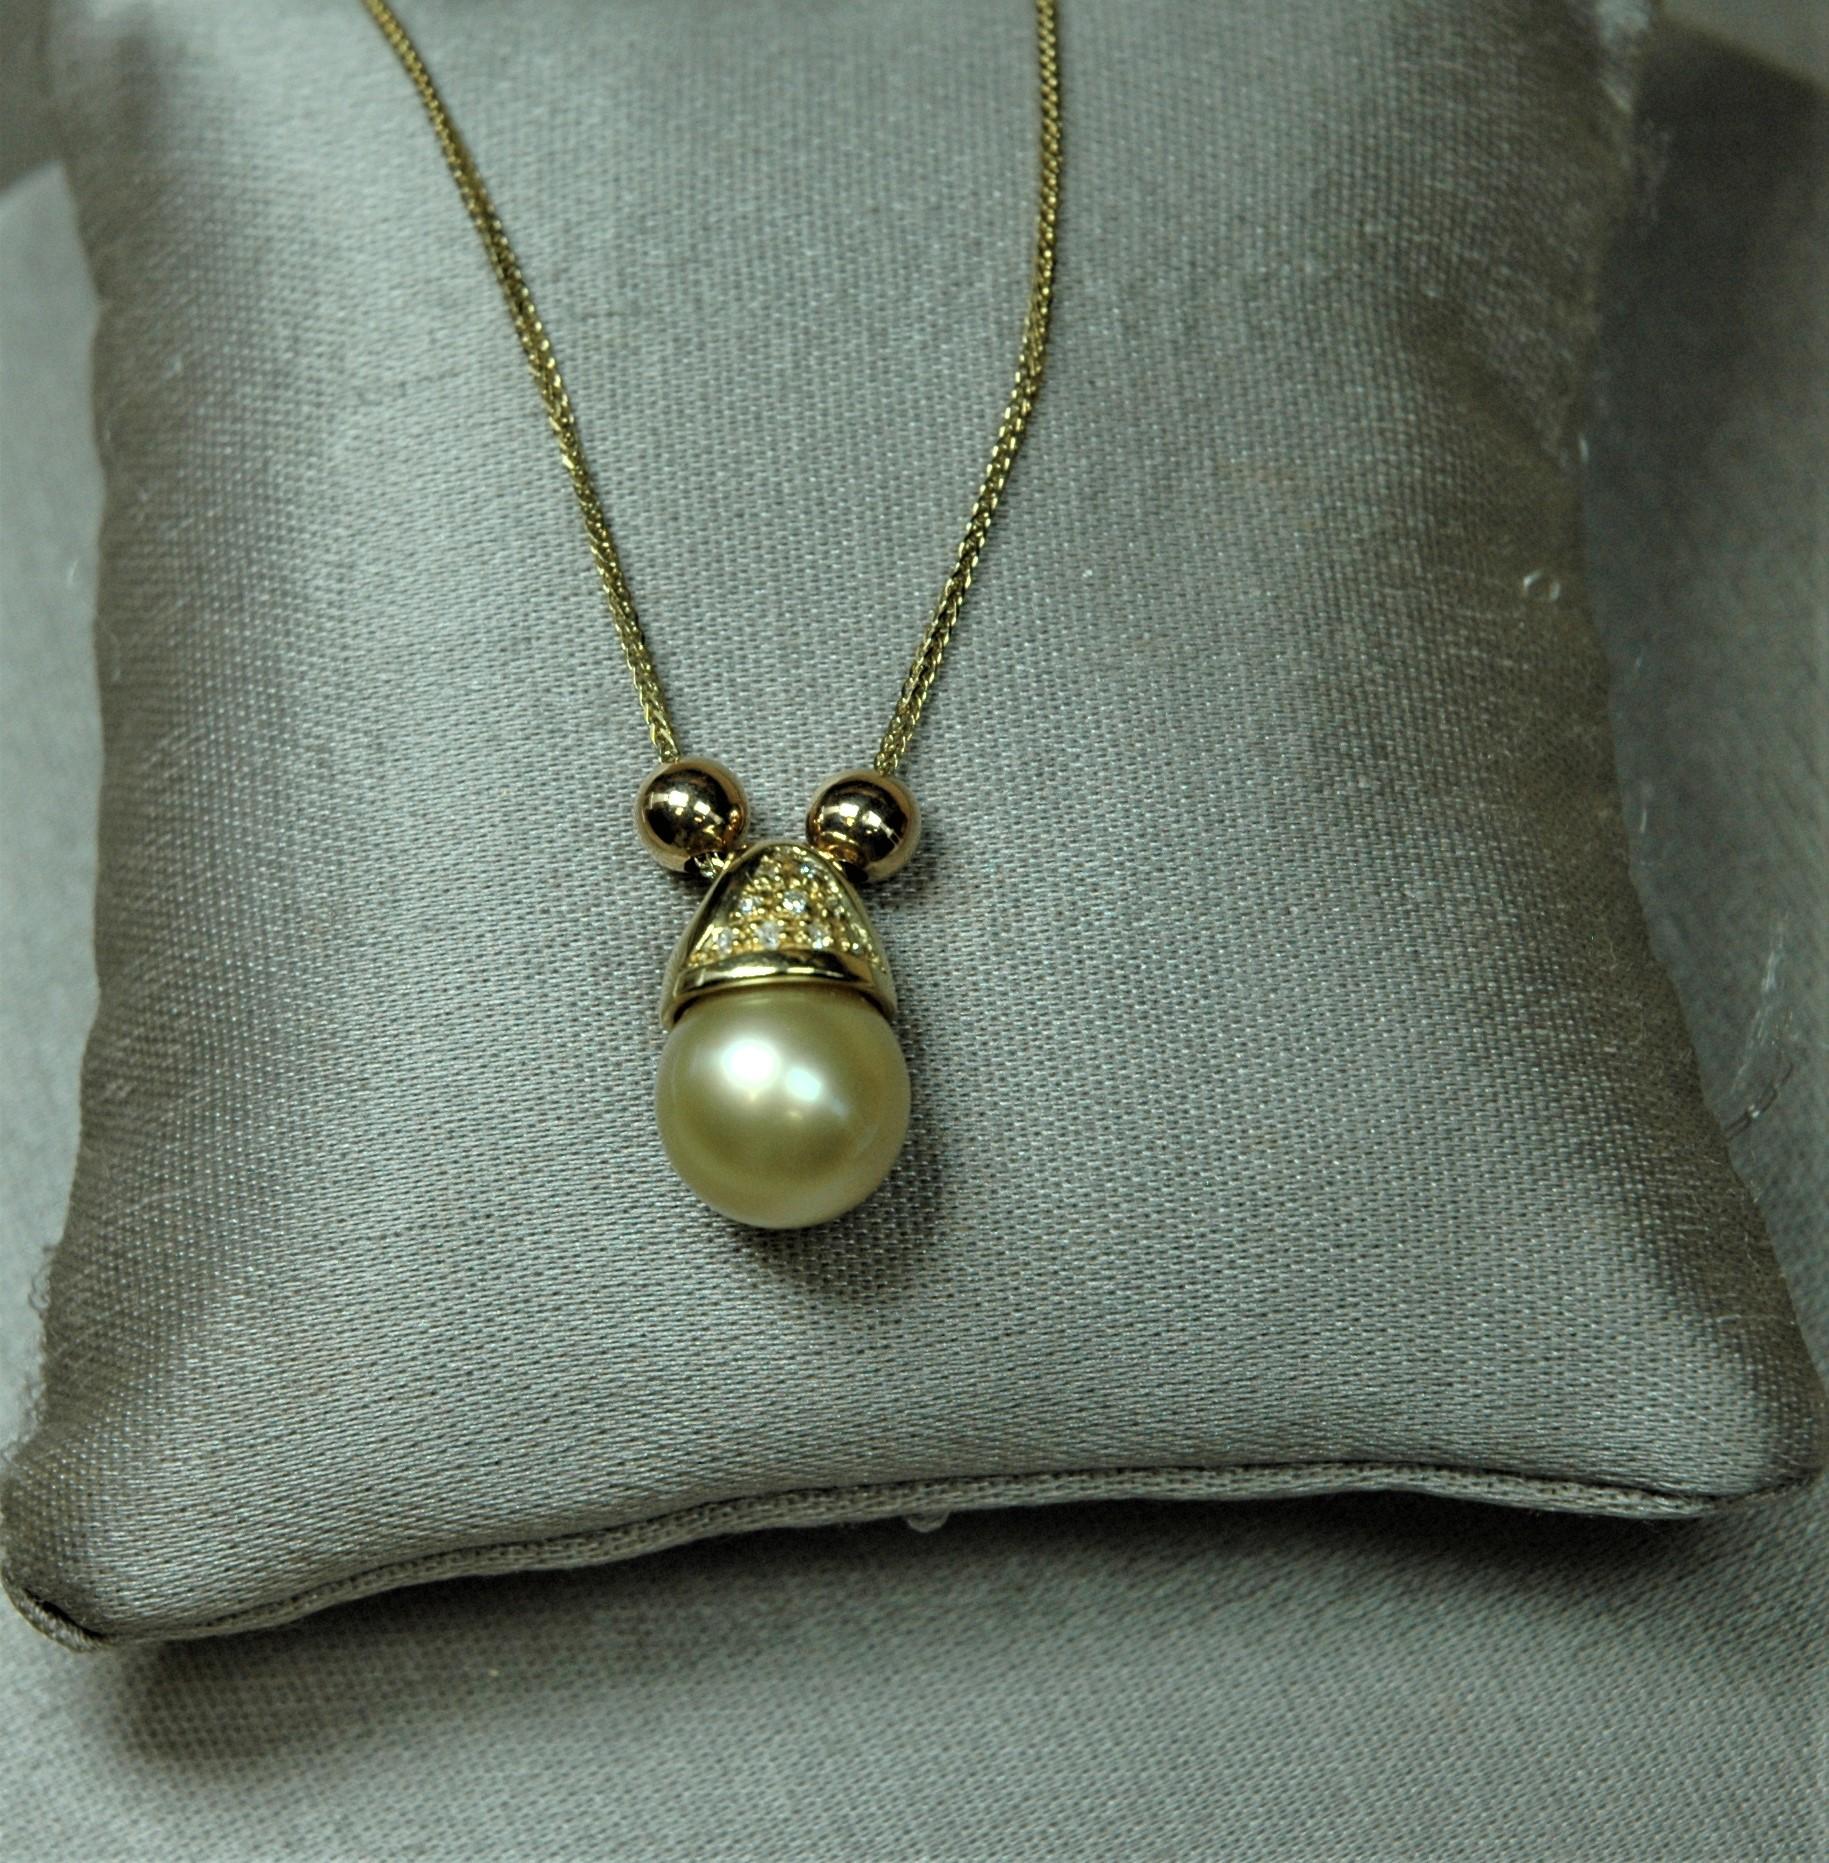 Brilliant Cut 18 Kt Yellow Gold Pendant Necklace with Diamonds and a Gold Pearl For Sale